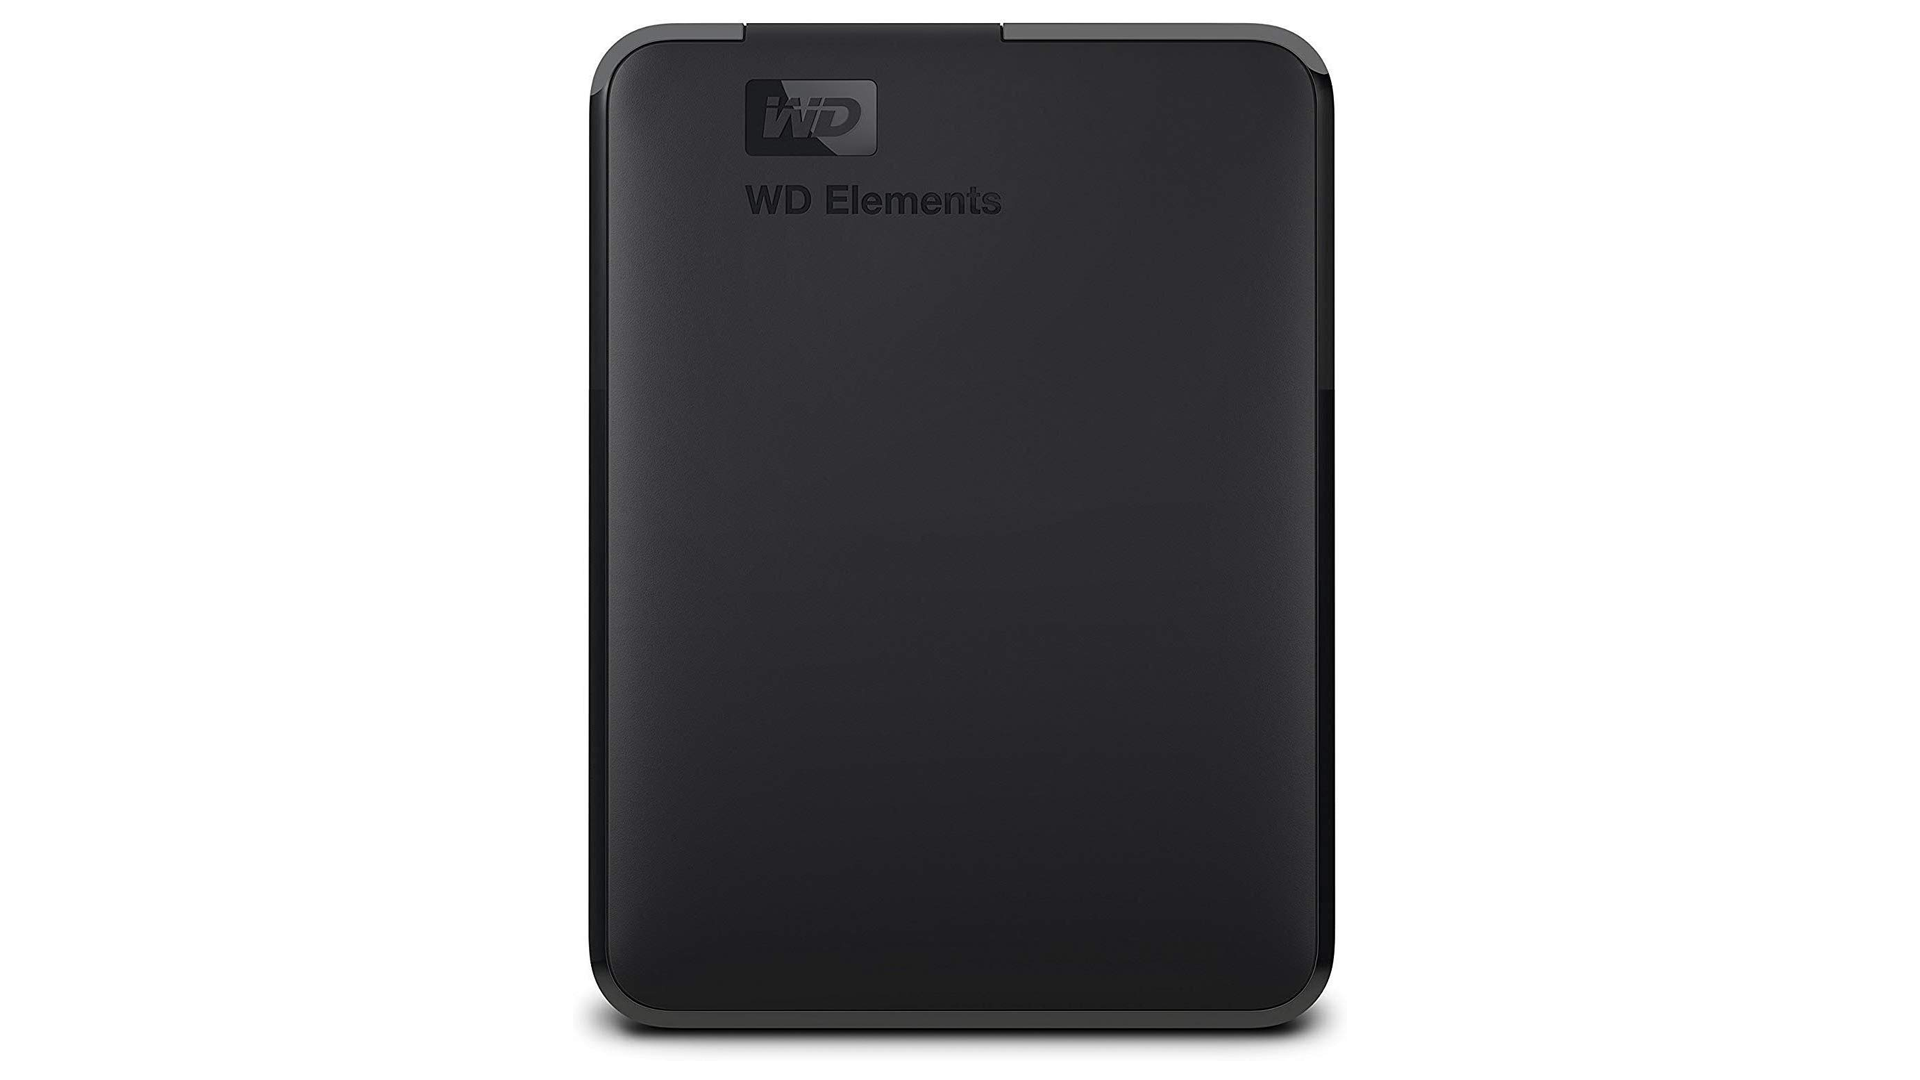 A photo of the Western Digital Express HDD.